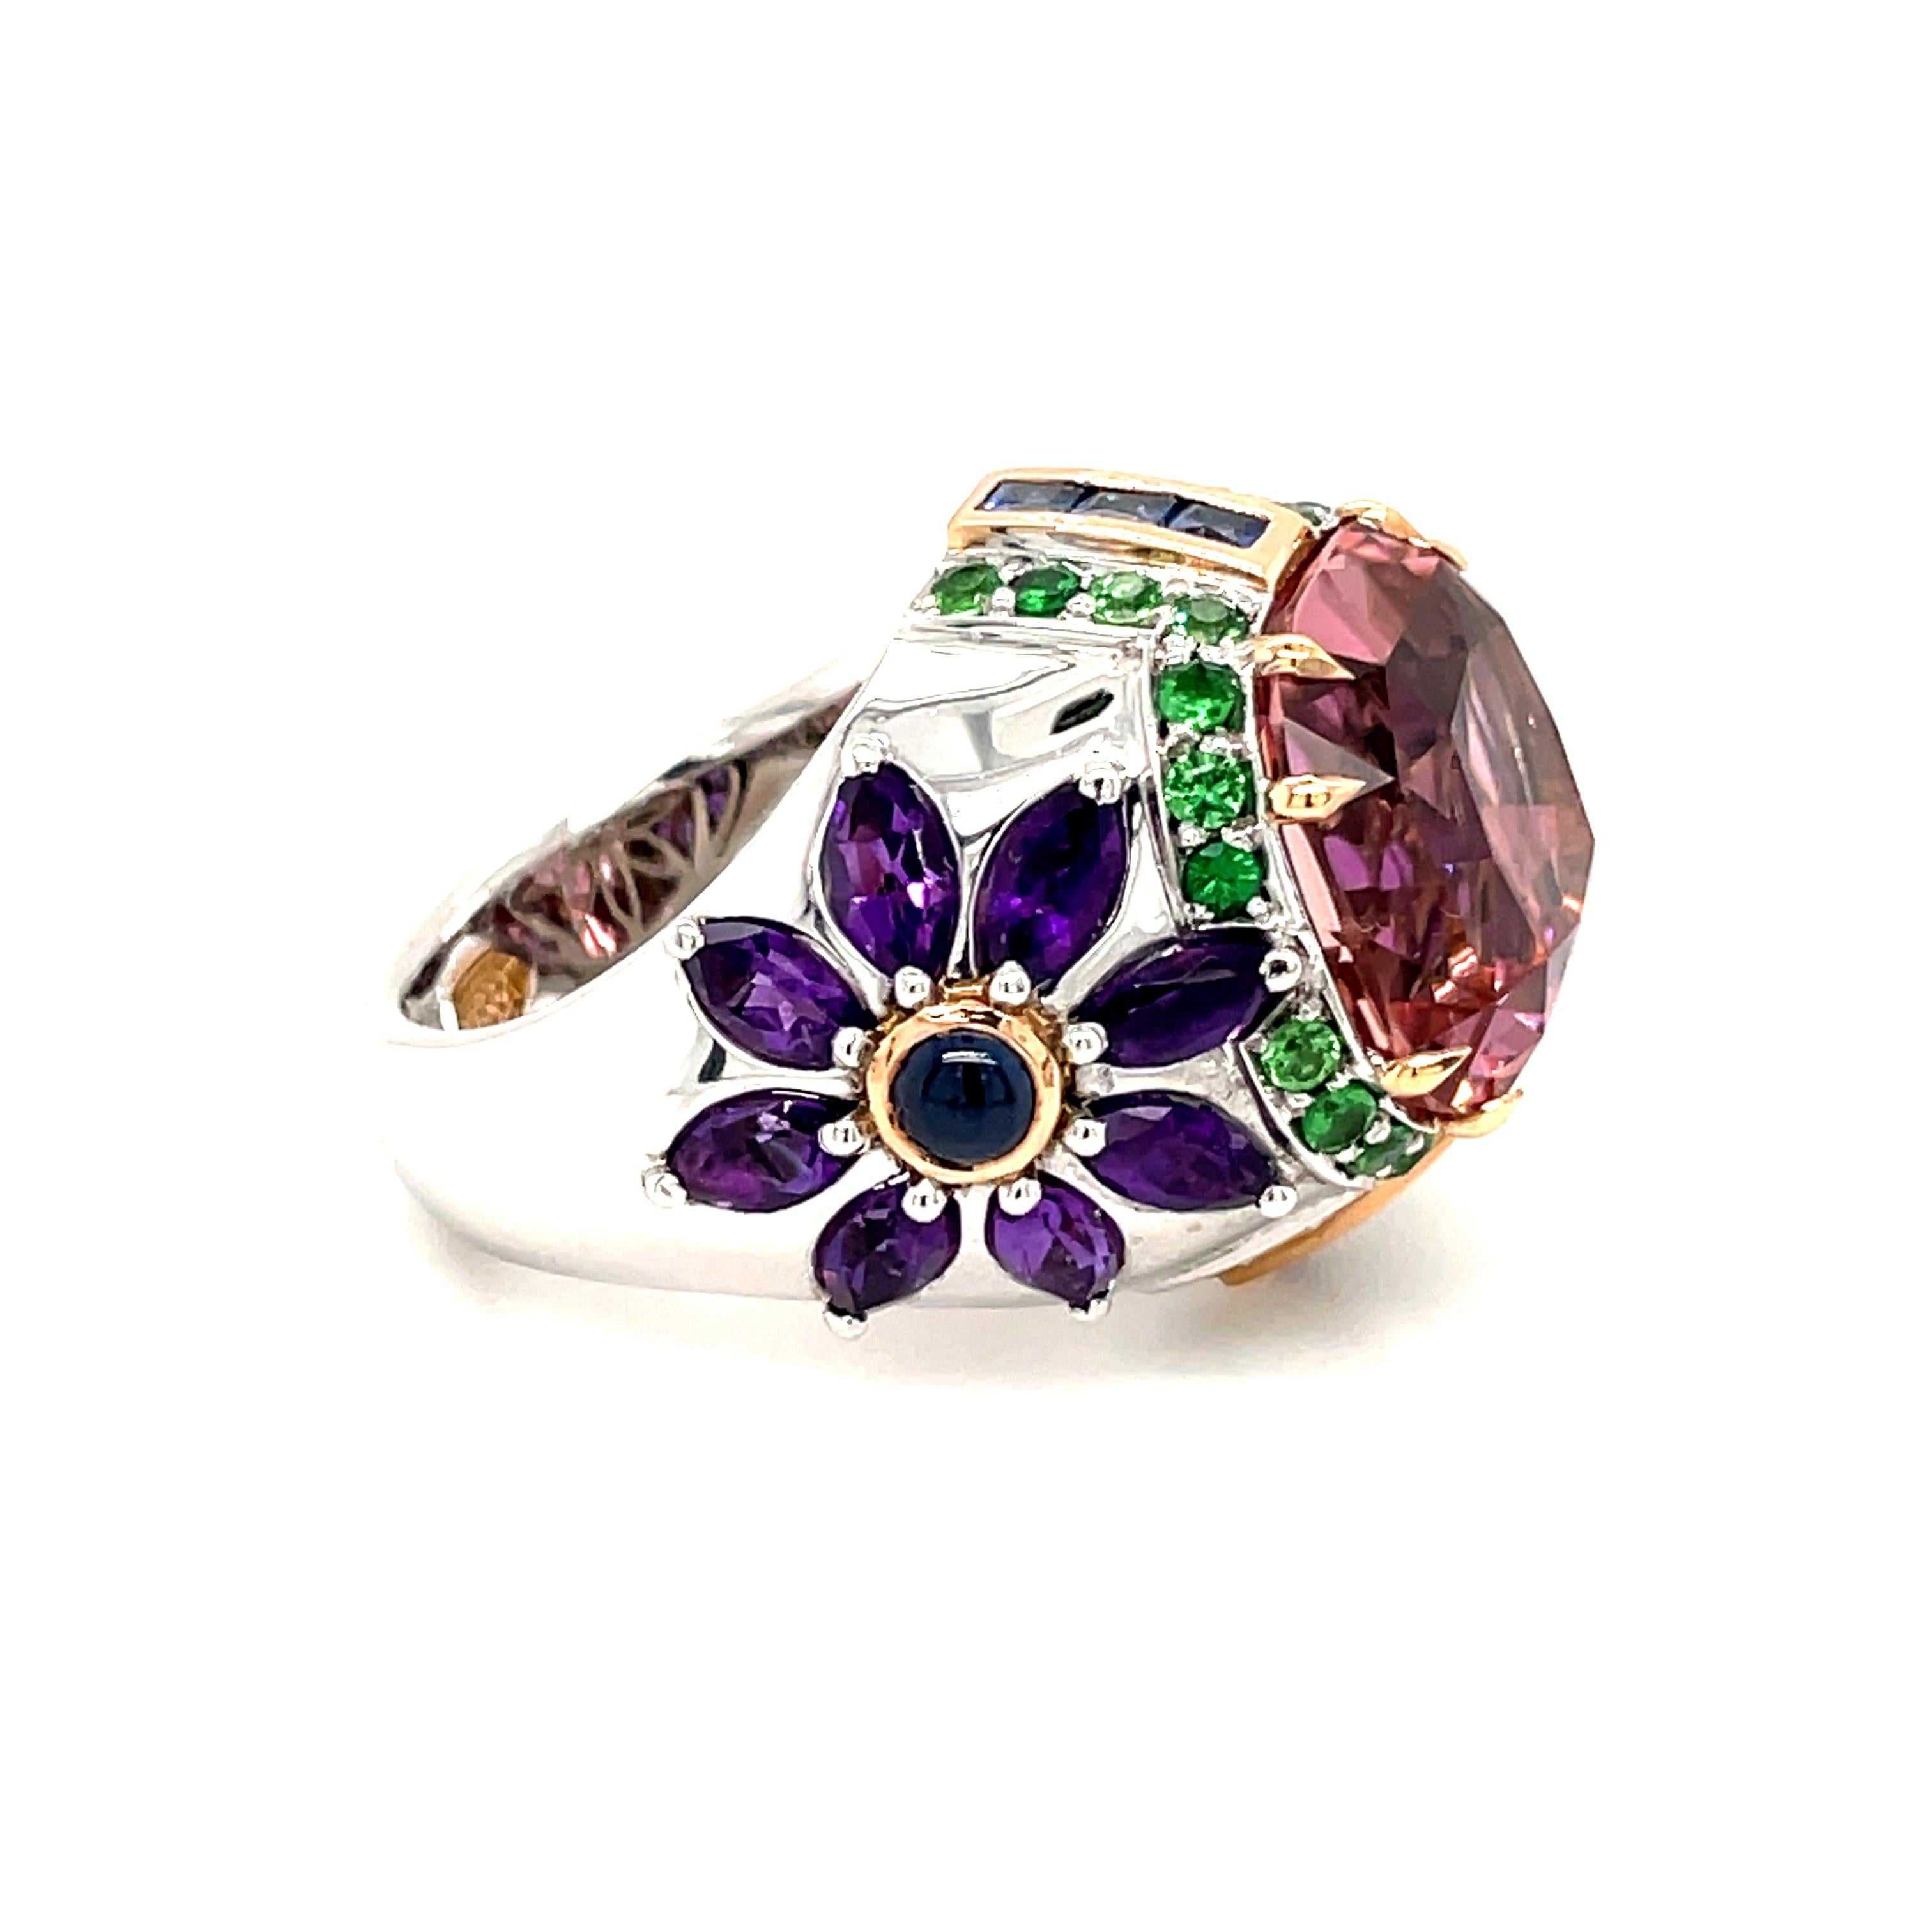 10.51ct Tourmaline Cocktail Ring with Garnets, Sapphires & Amethyst by Musson For Sale 2